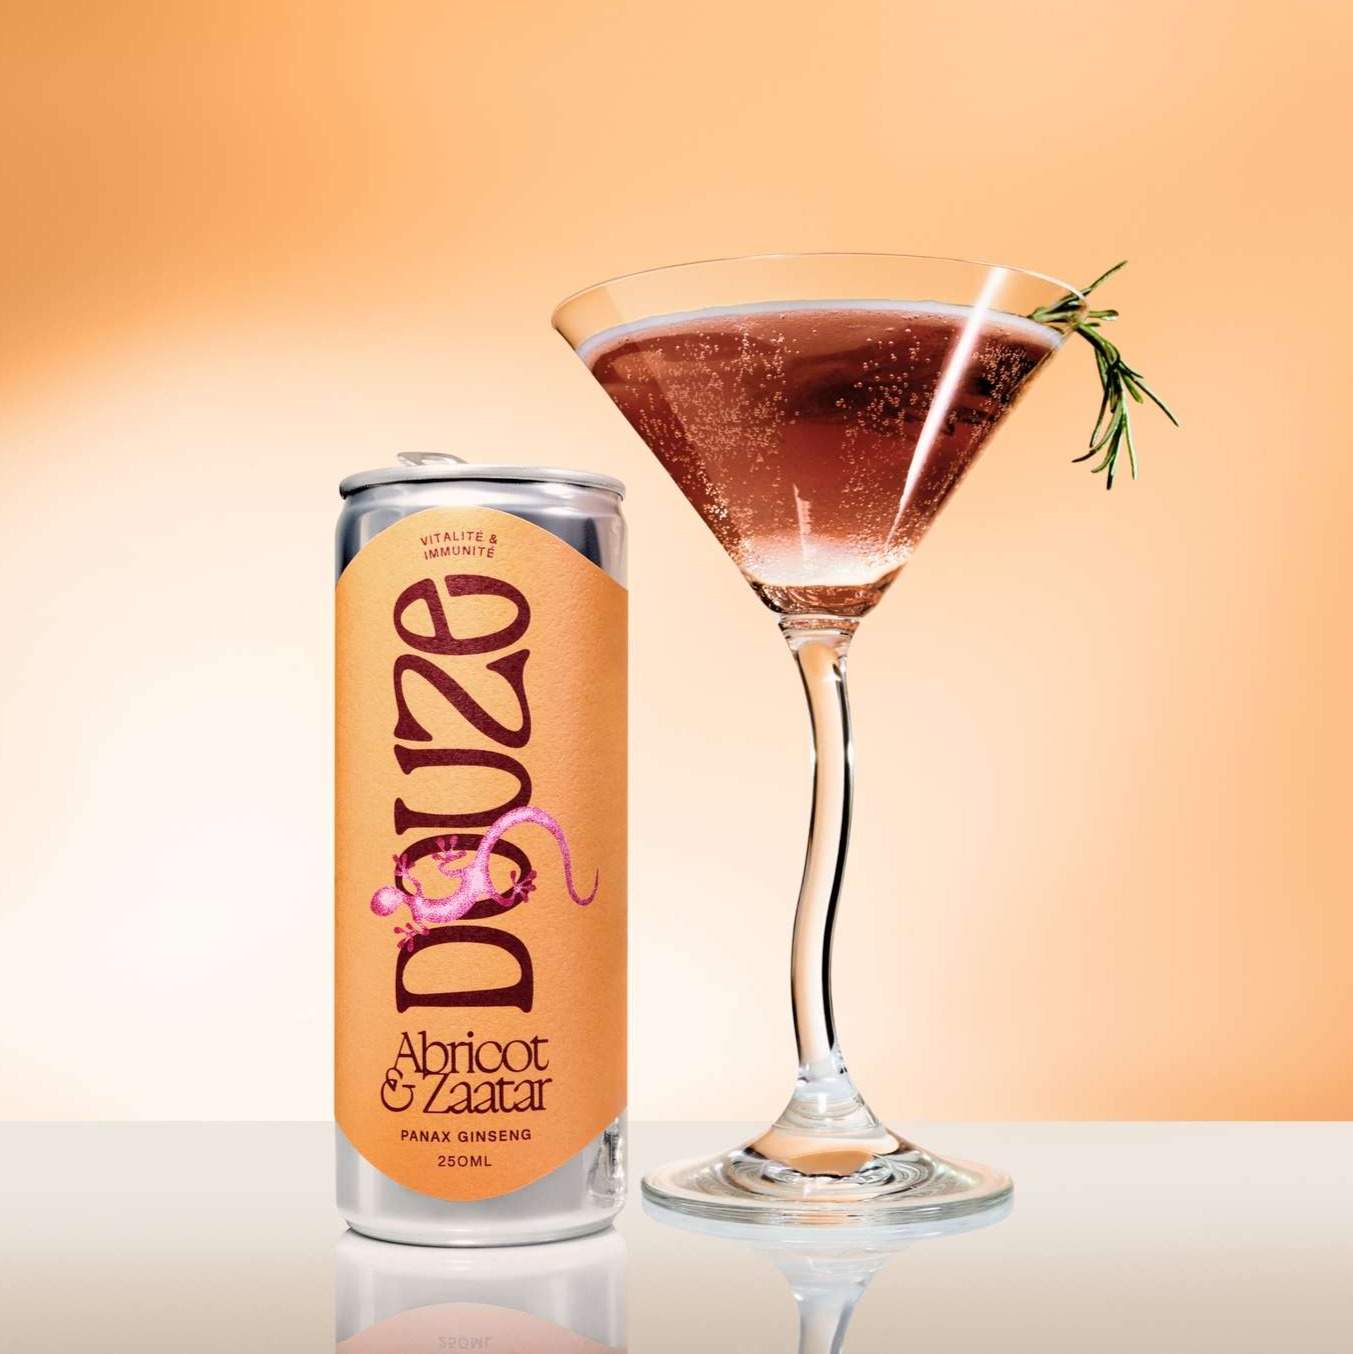 A Douze drink Apricot & Za'atar can next to a full martini glass, garnished with rosemary, against a gradient background.